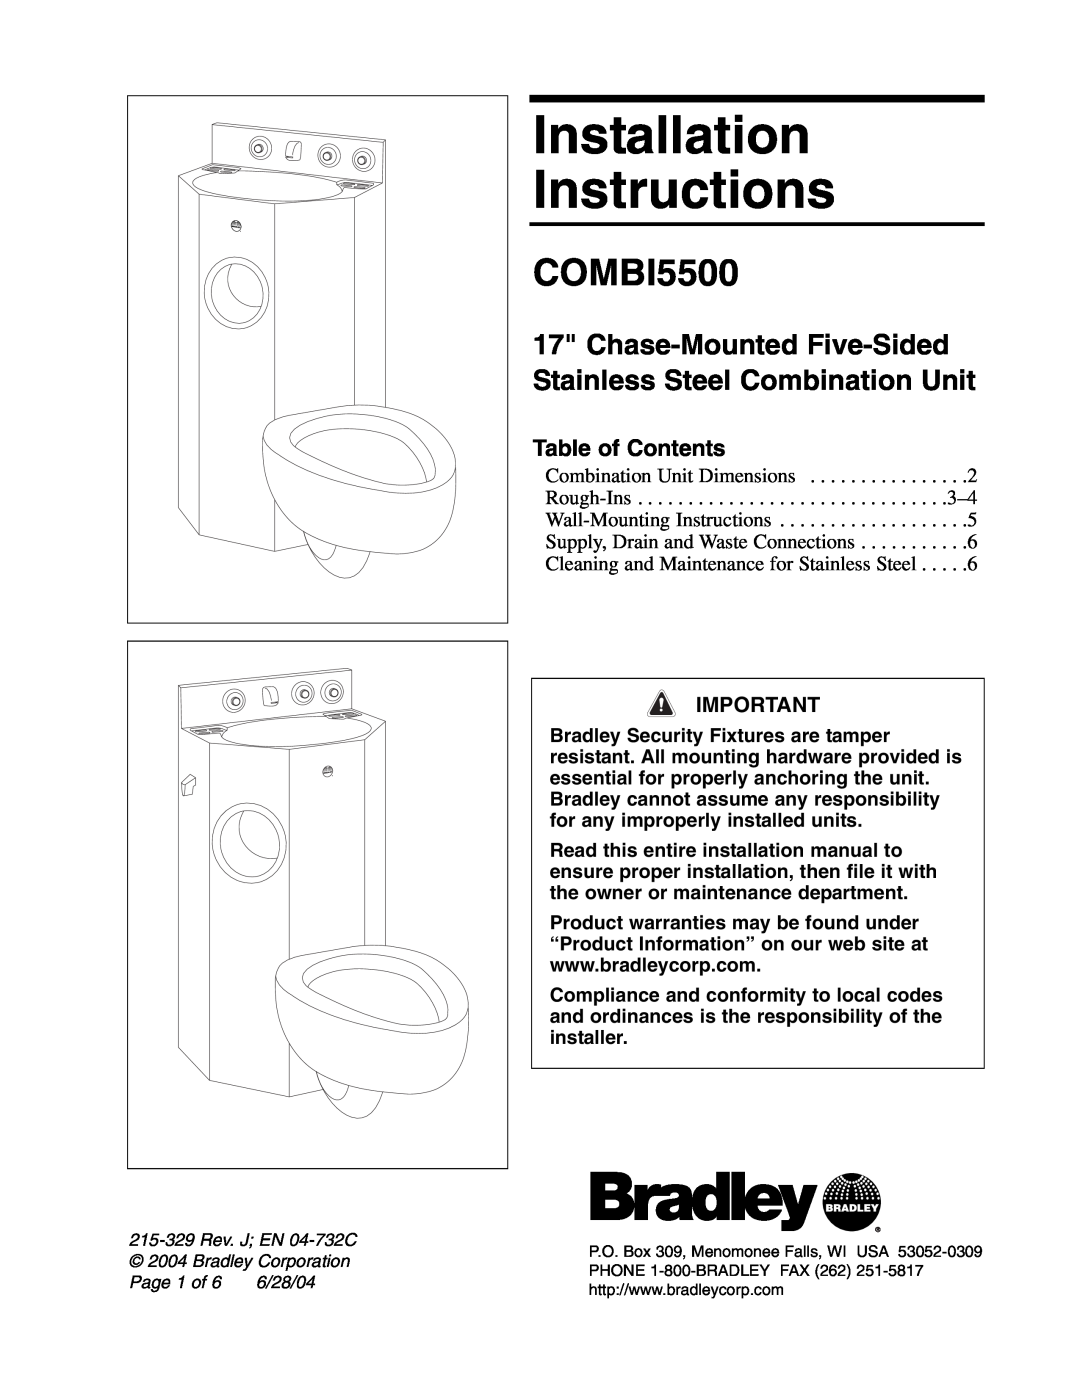 Bradley Brand Furniture COMBI5500 installation instructions Chase-Mounted Five-Sided Stainless Steel Combination Unit 